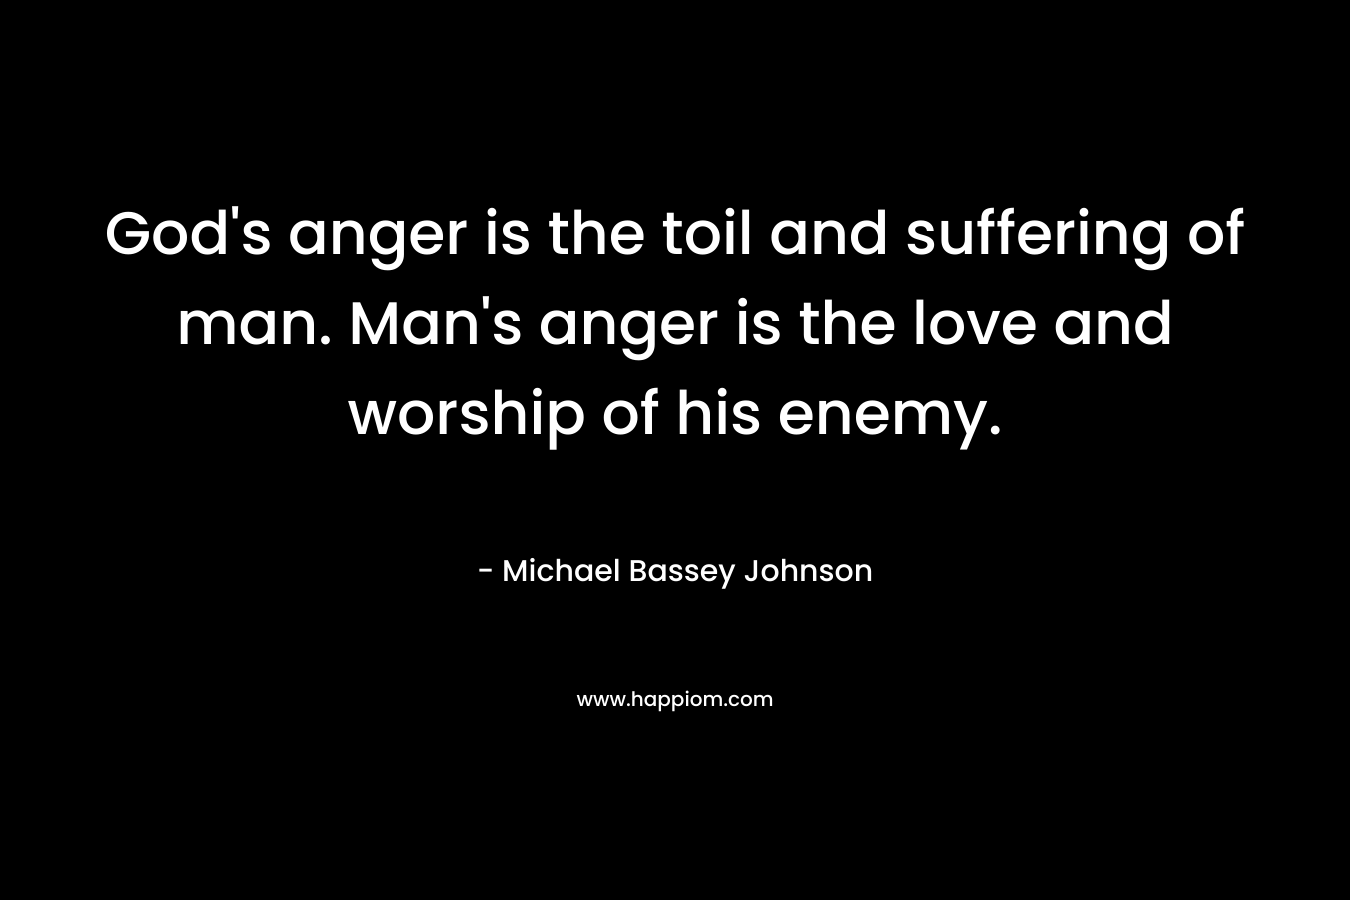 God’s anger is the toil and suffering of man. Man’s anger is the love and worship of his enemy. – Michael Bassey Johnson